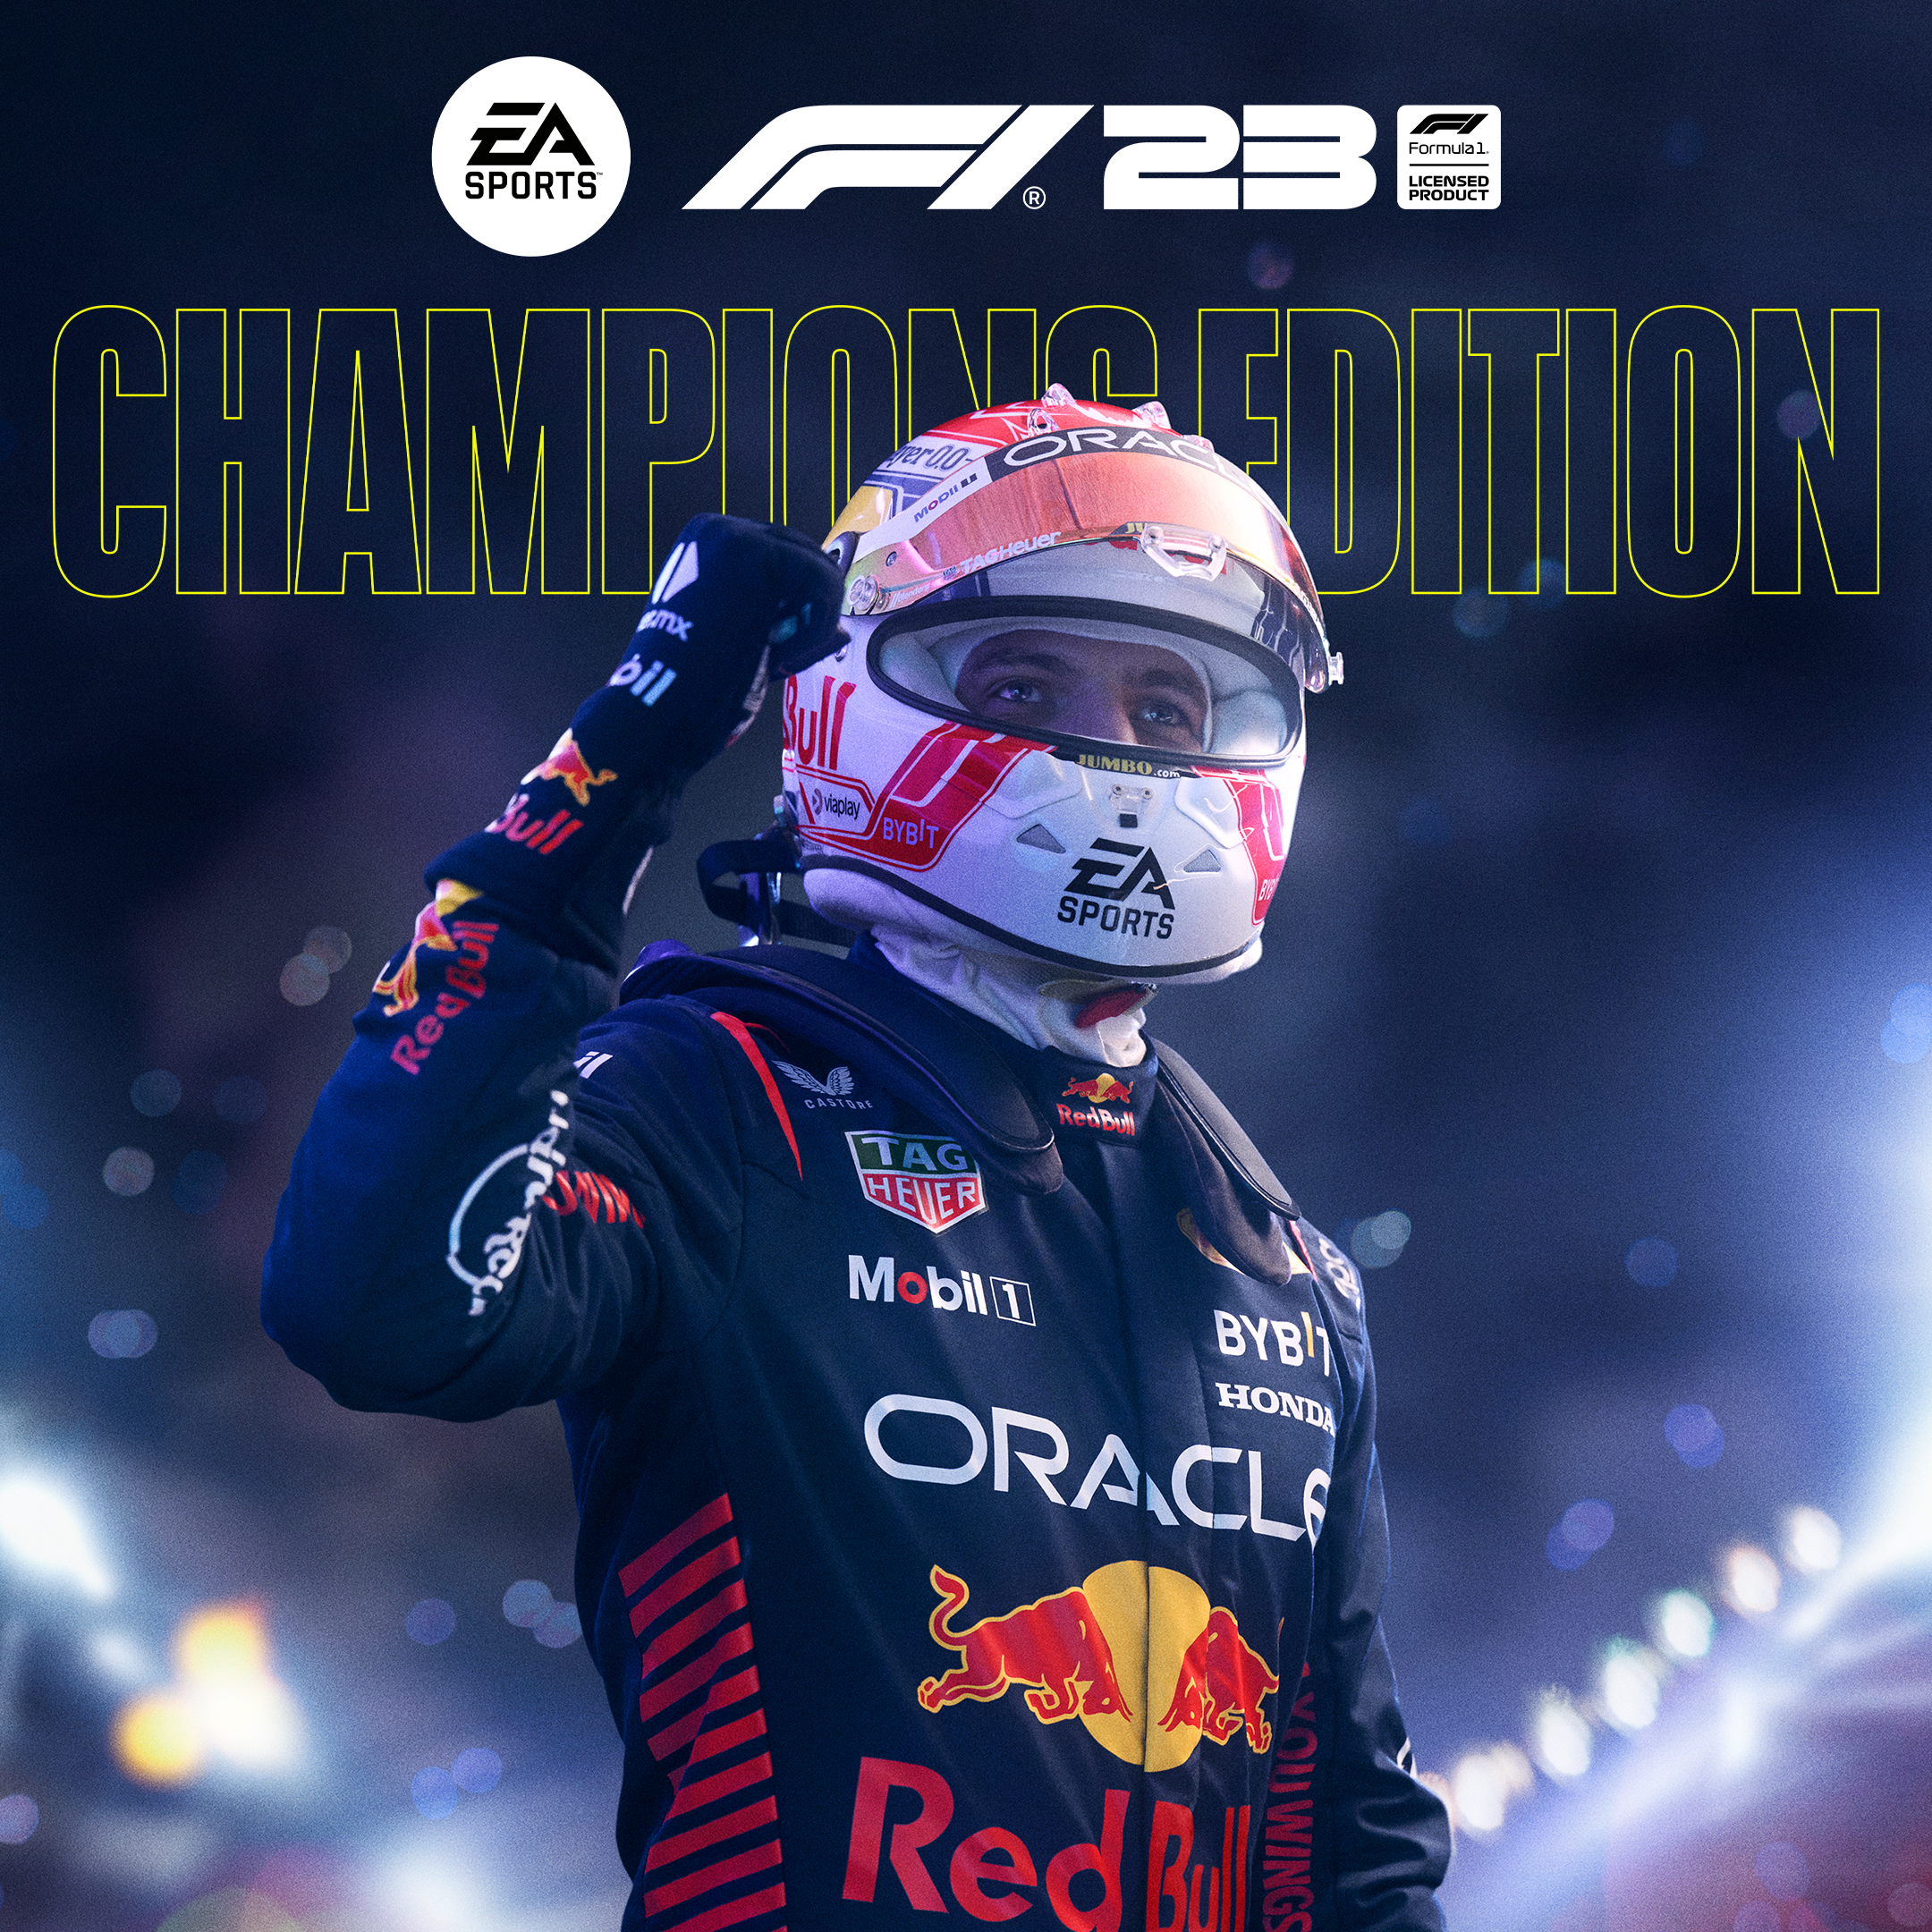 Is F1 23 game making the right changes? Our verdict - The Race